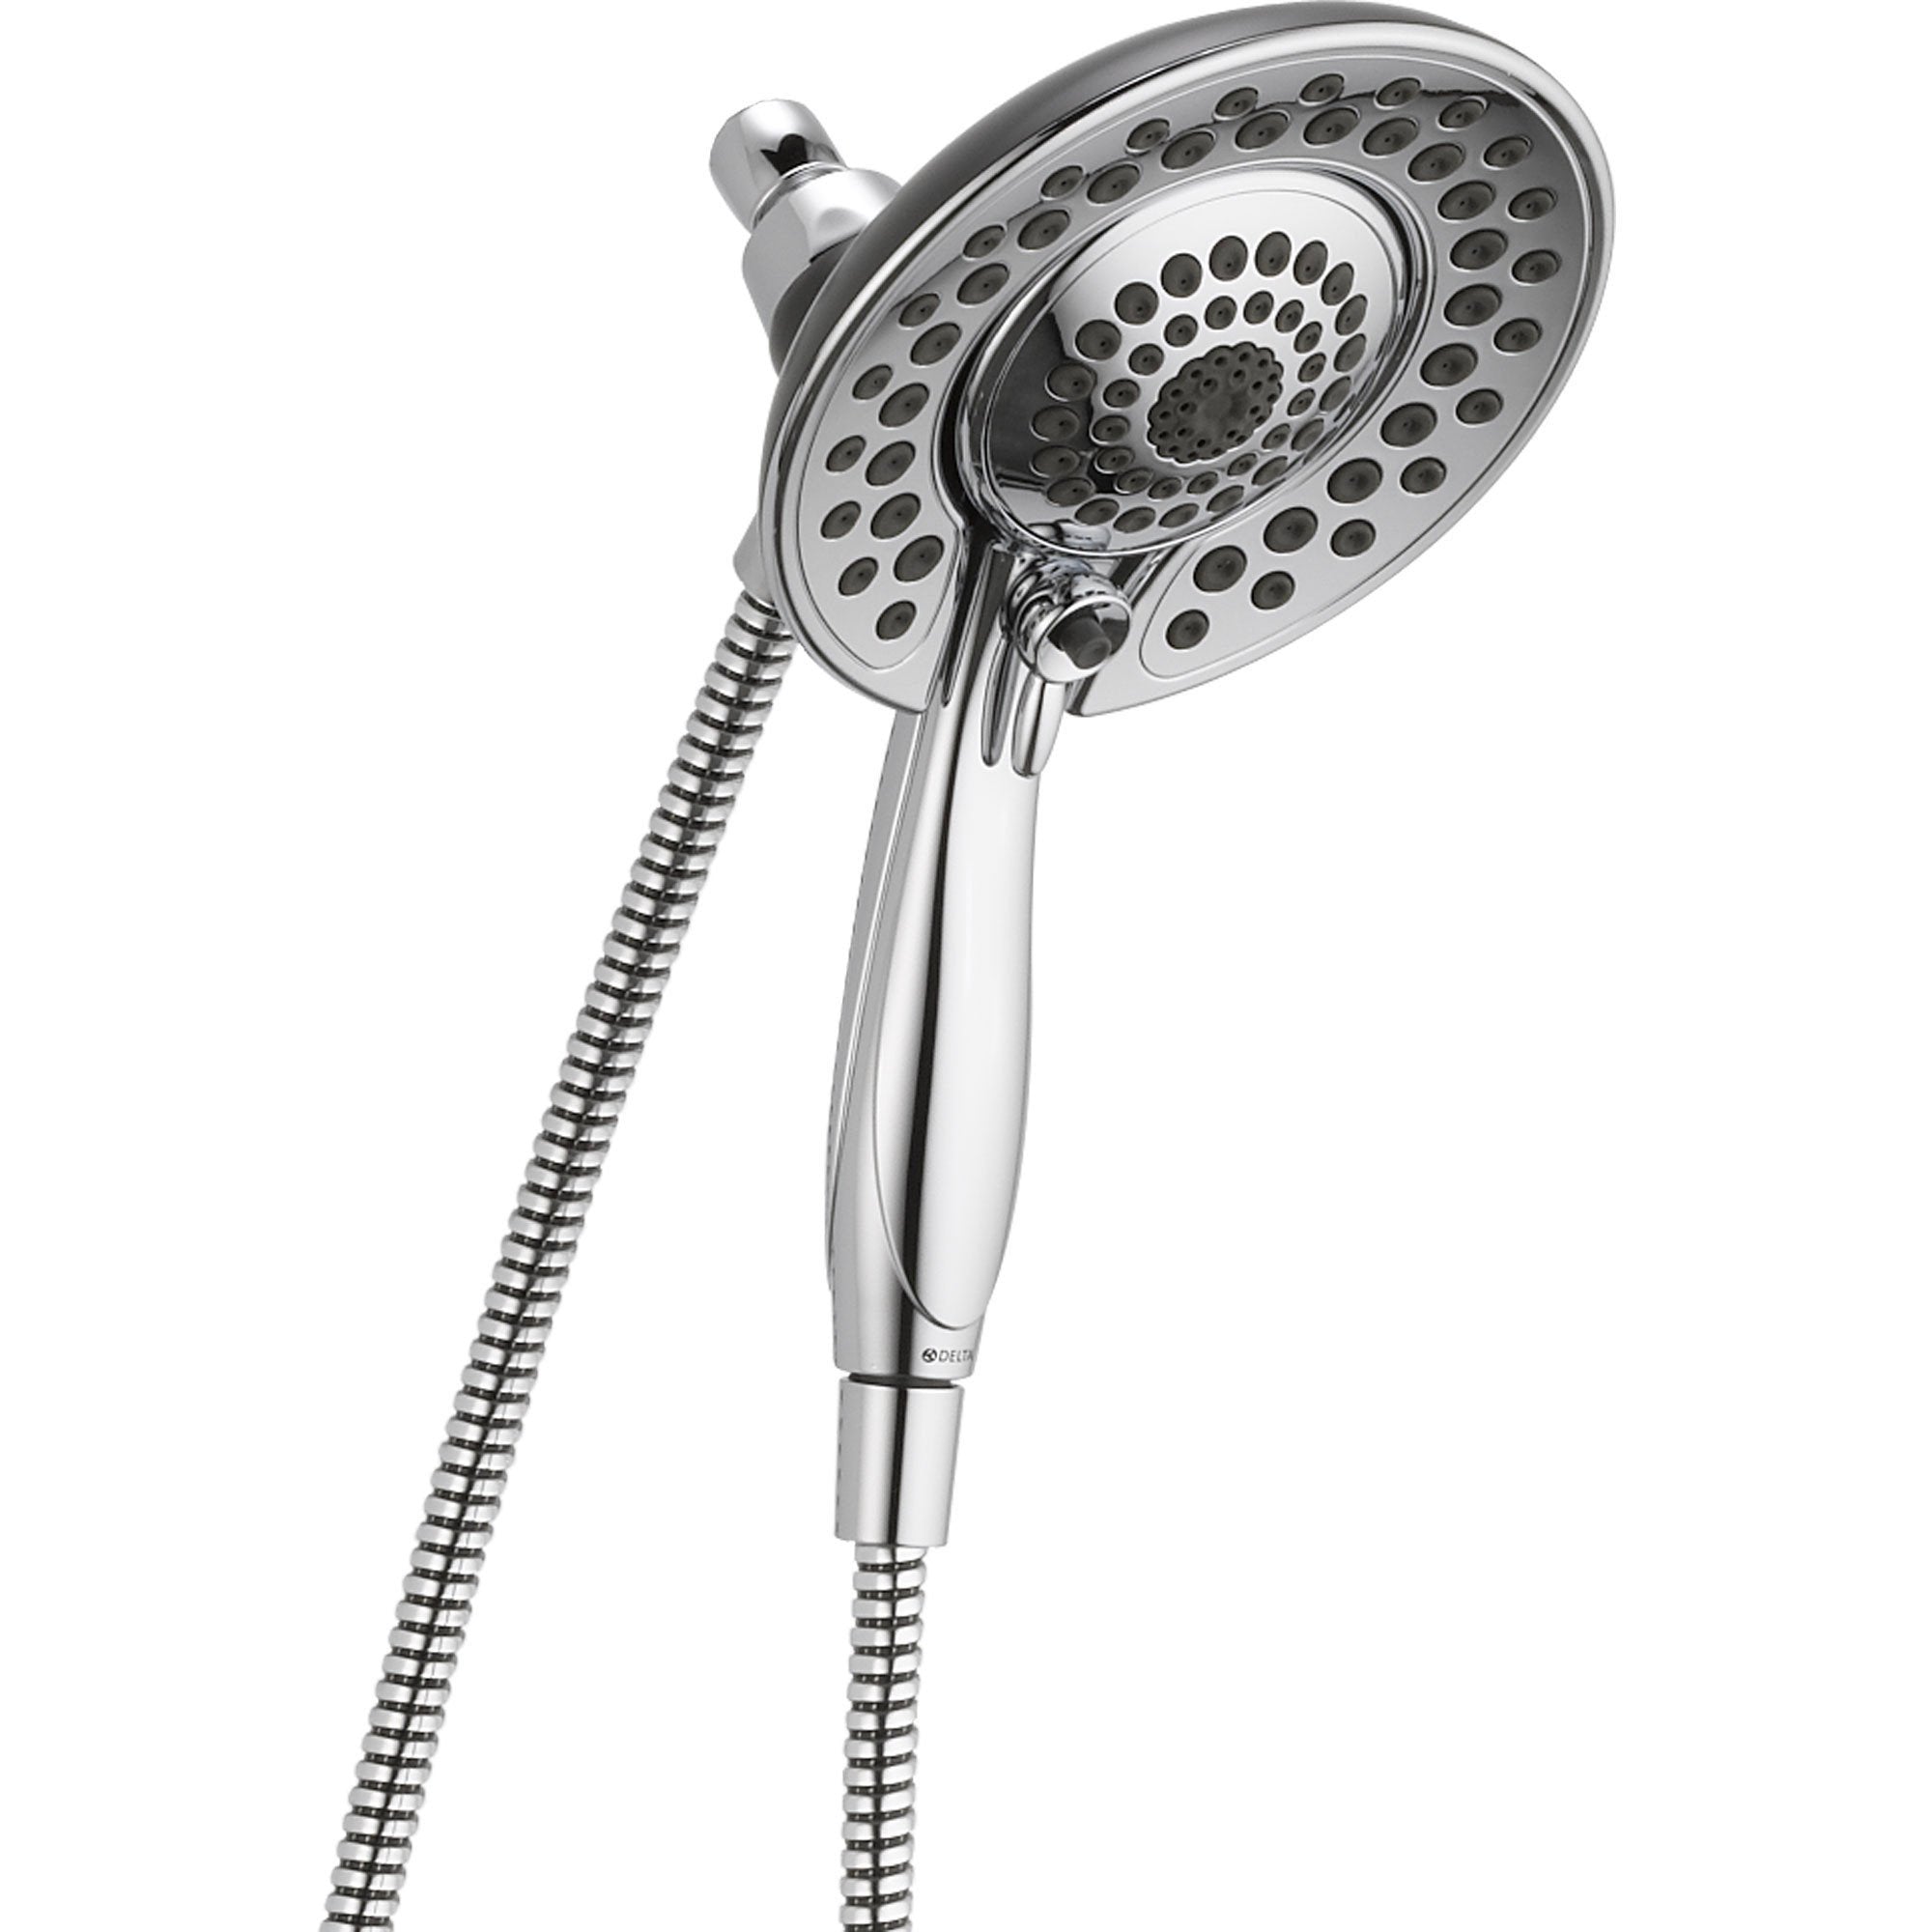 Delta In2ition Chrome 2-in-1 Handheld Shower and Shower Head Combination 521960